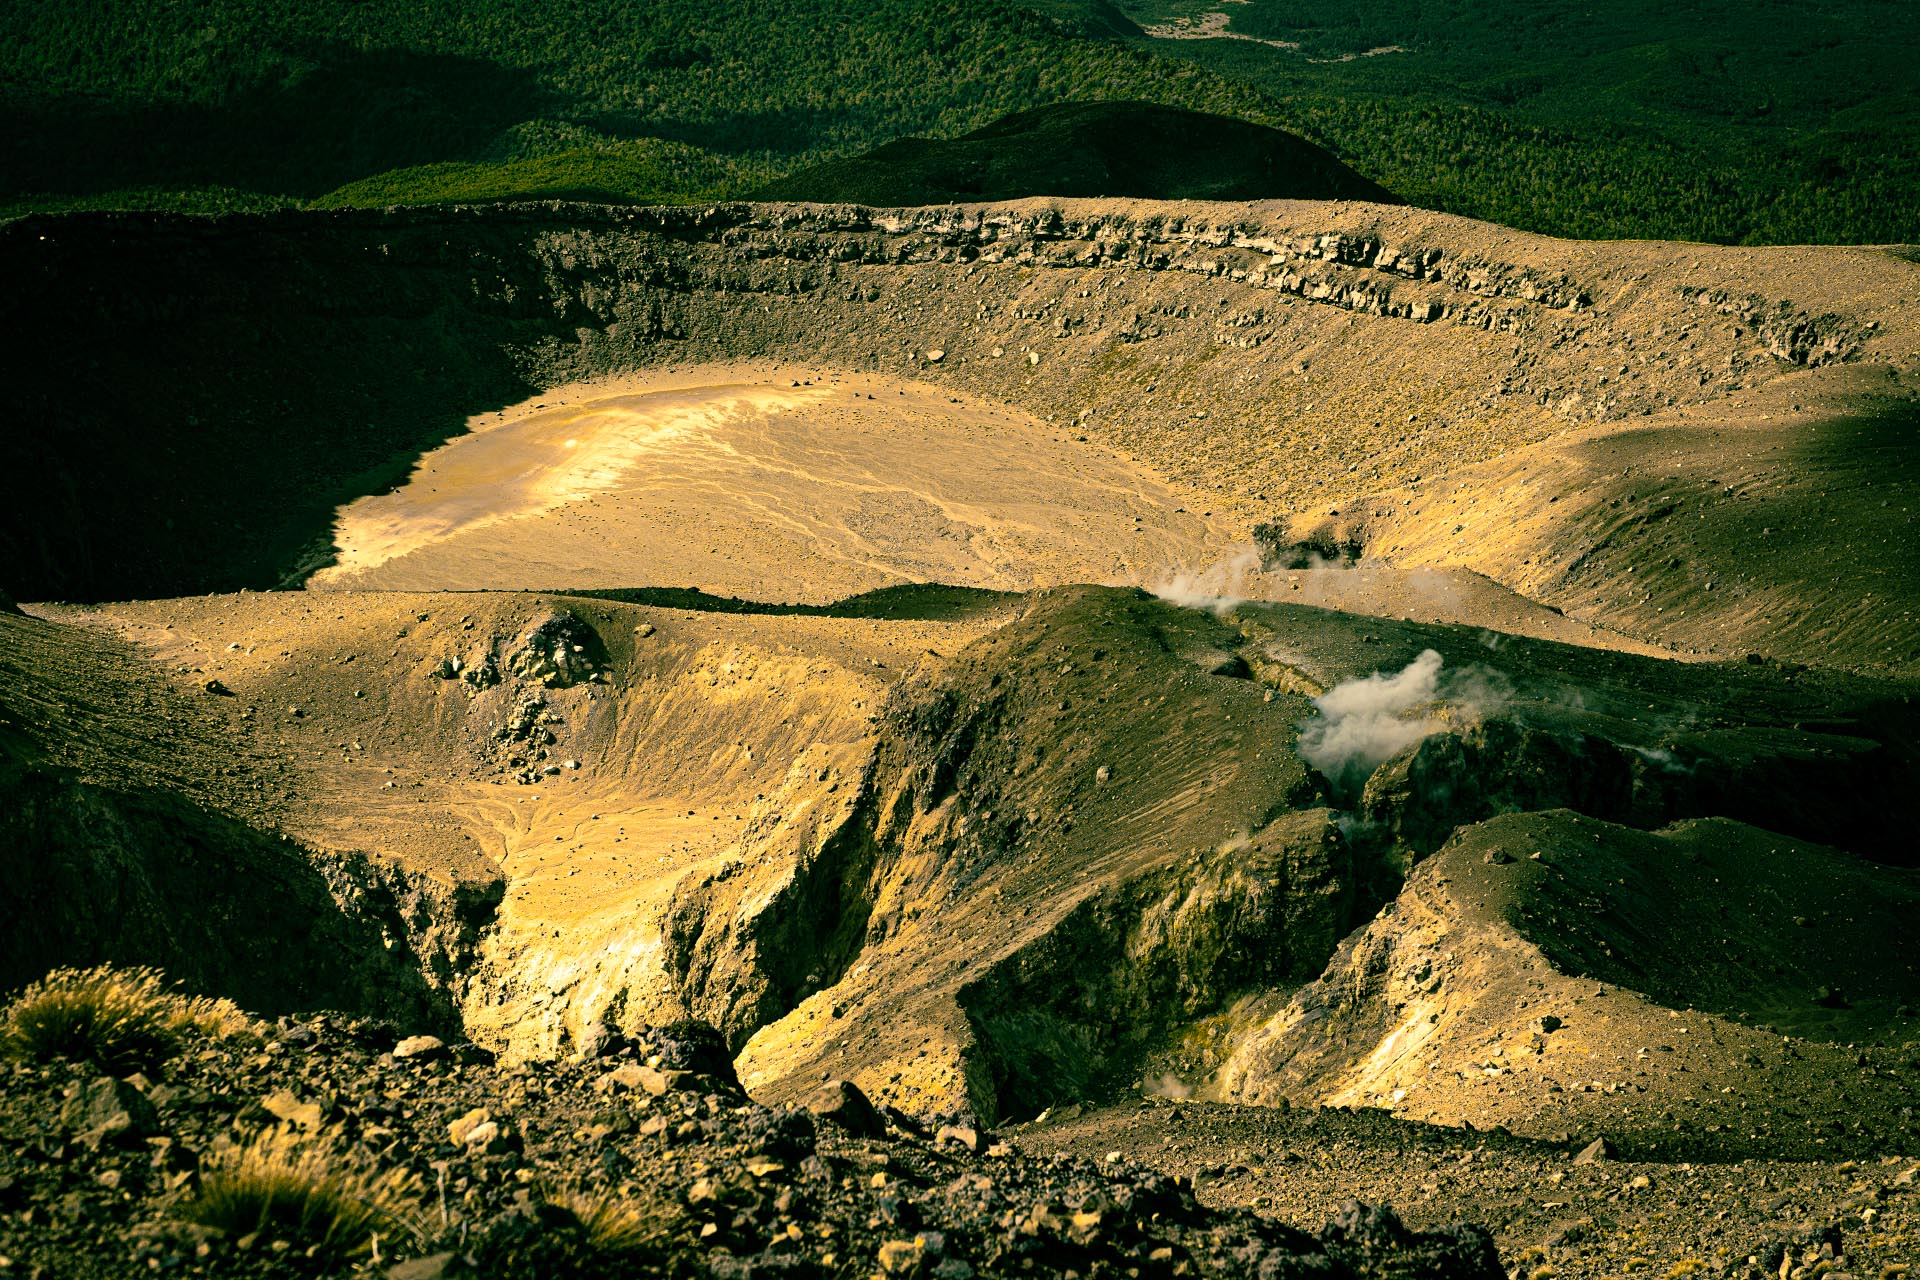 Te Mari Crater and the 2012 explosion crater.